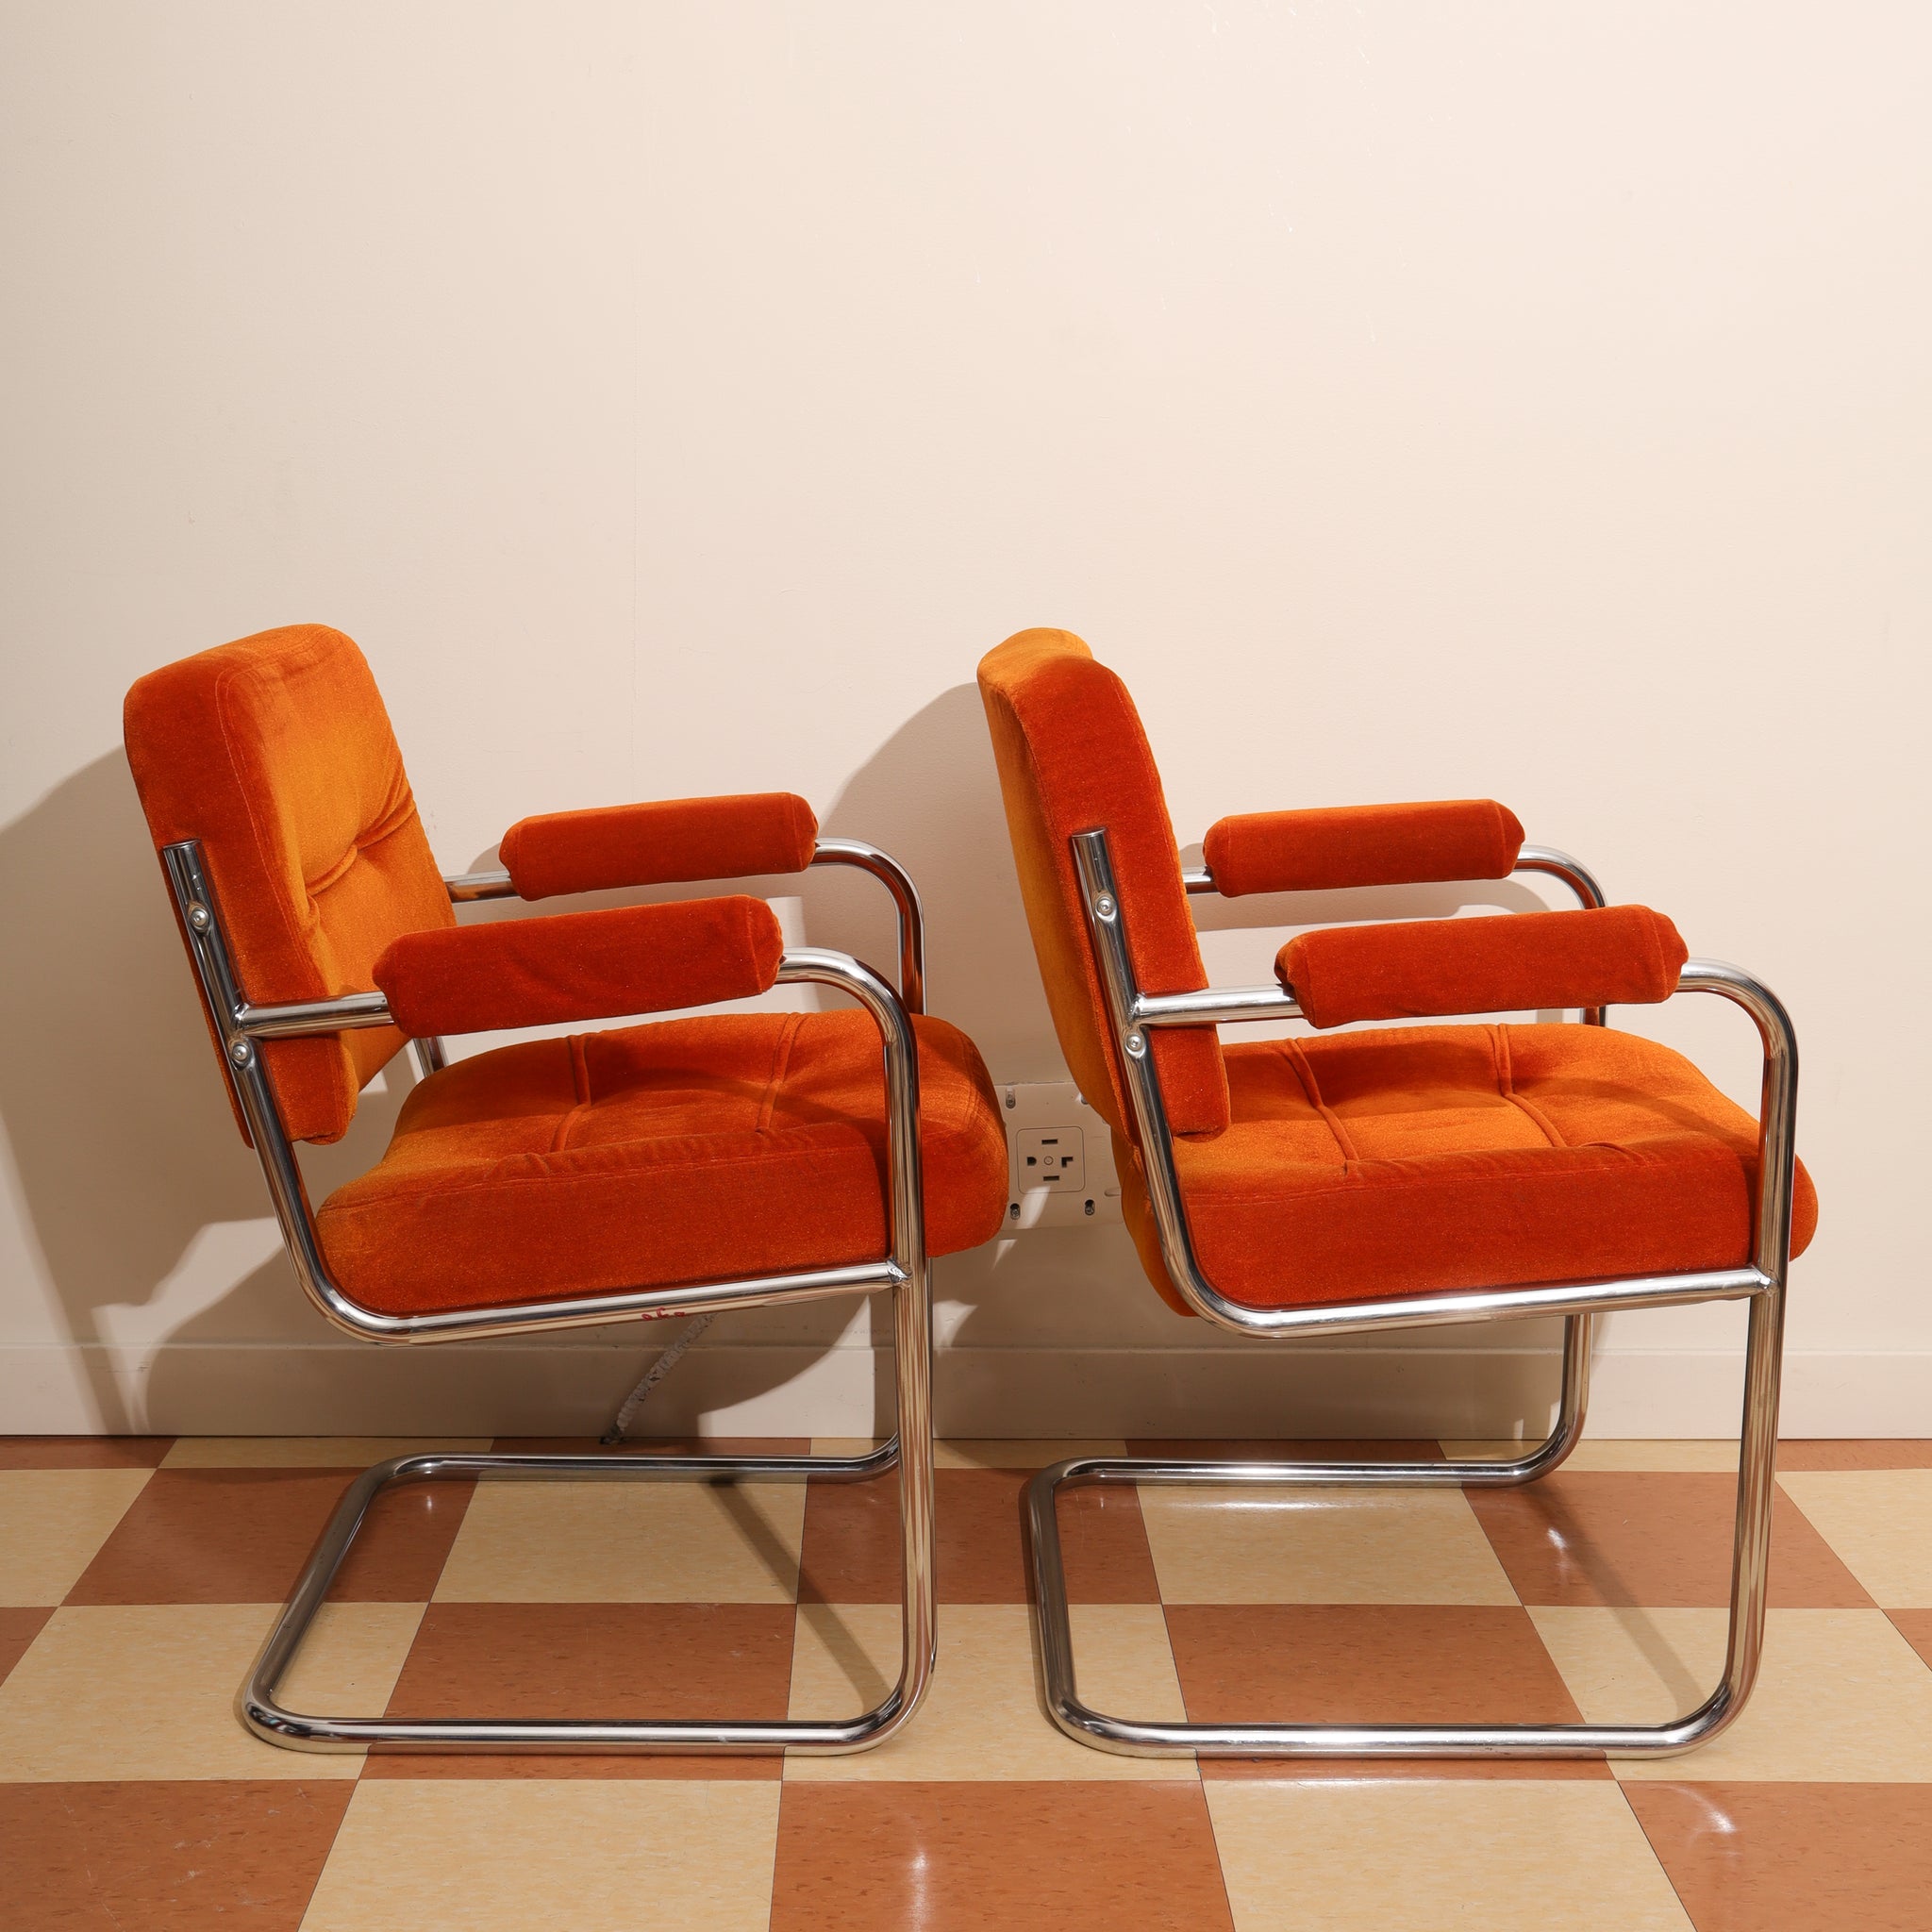 Plush Orange Cantilever Chairs - 1970s - Sold Separately